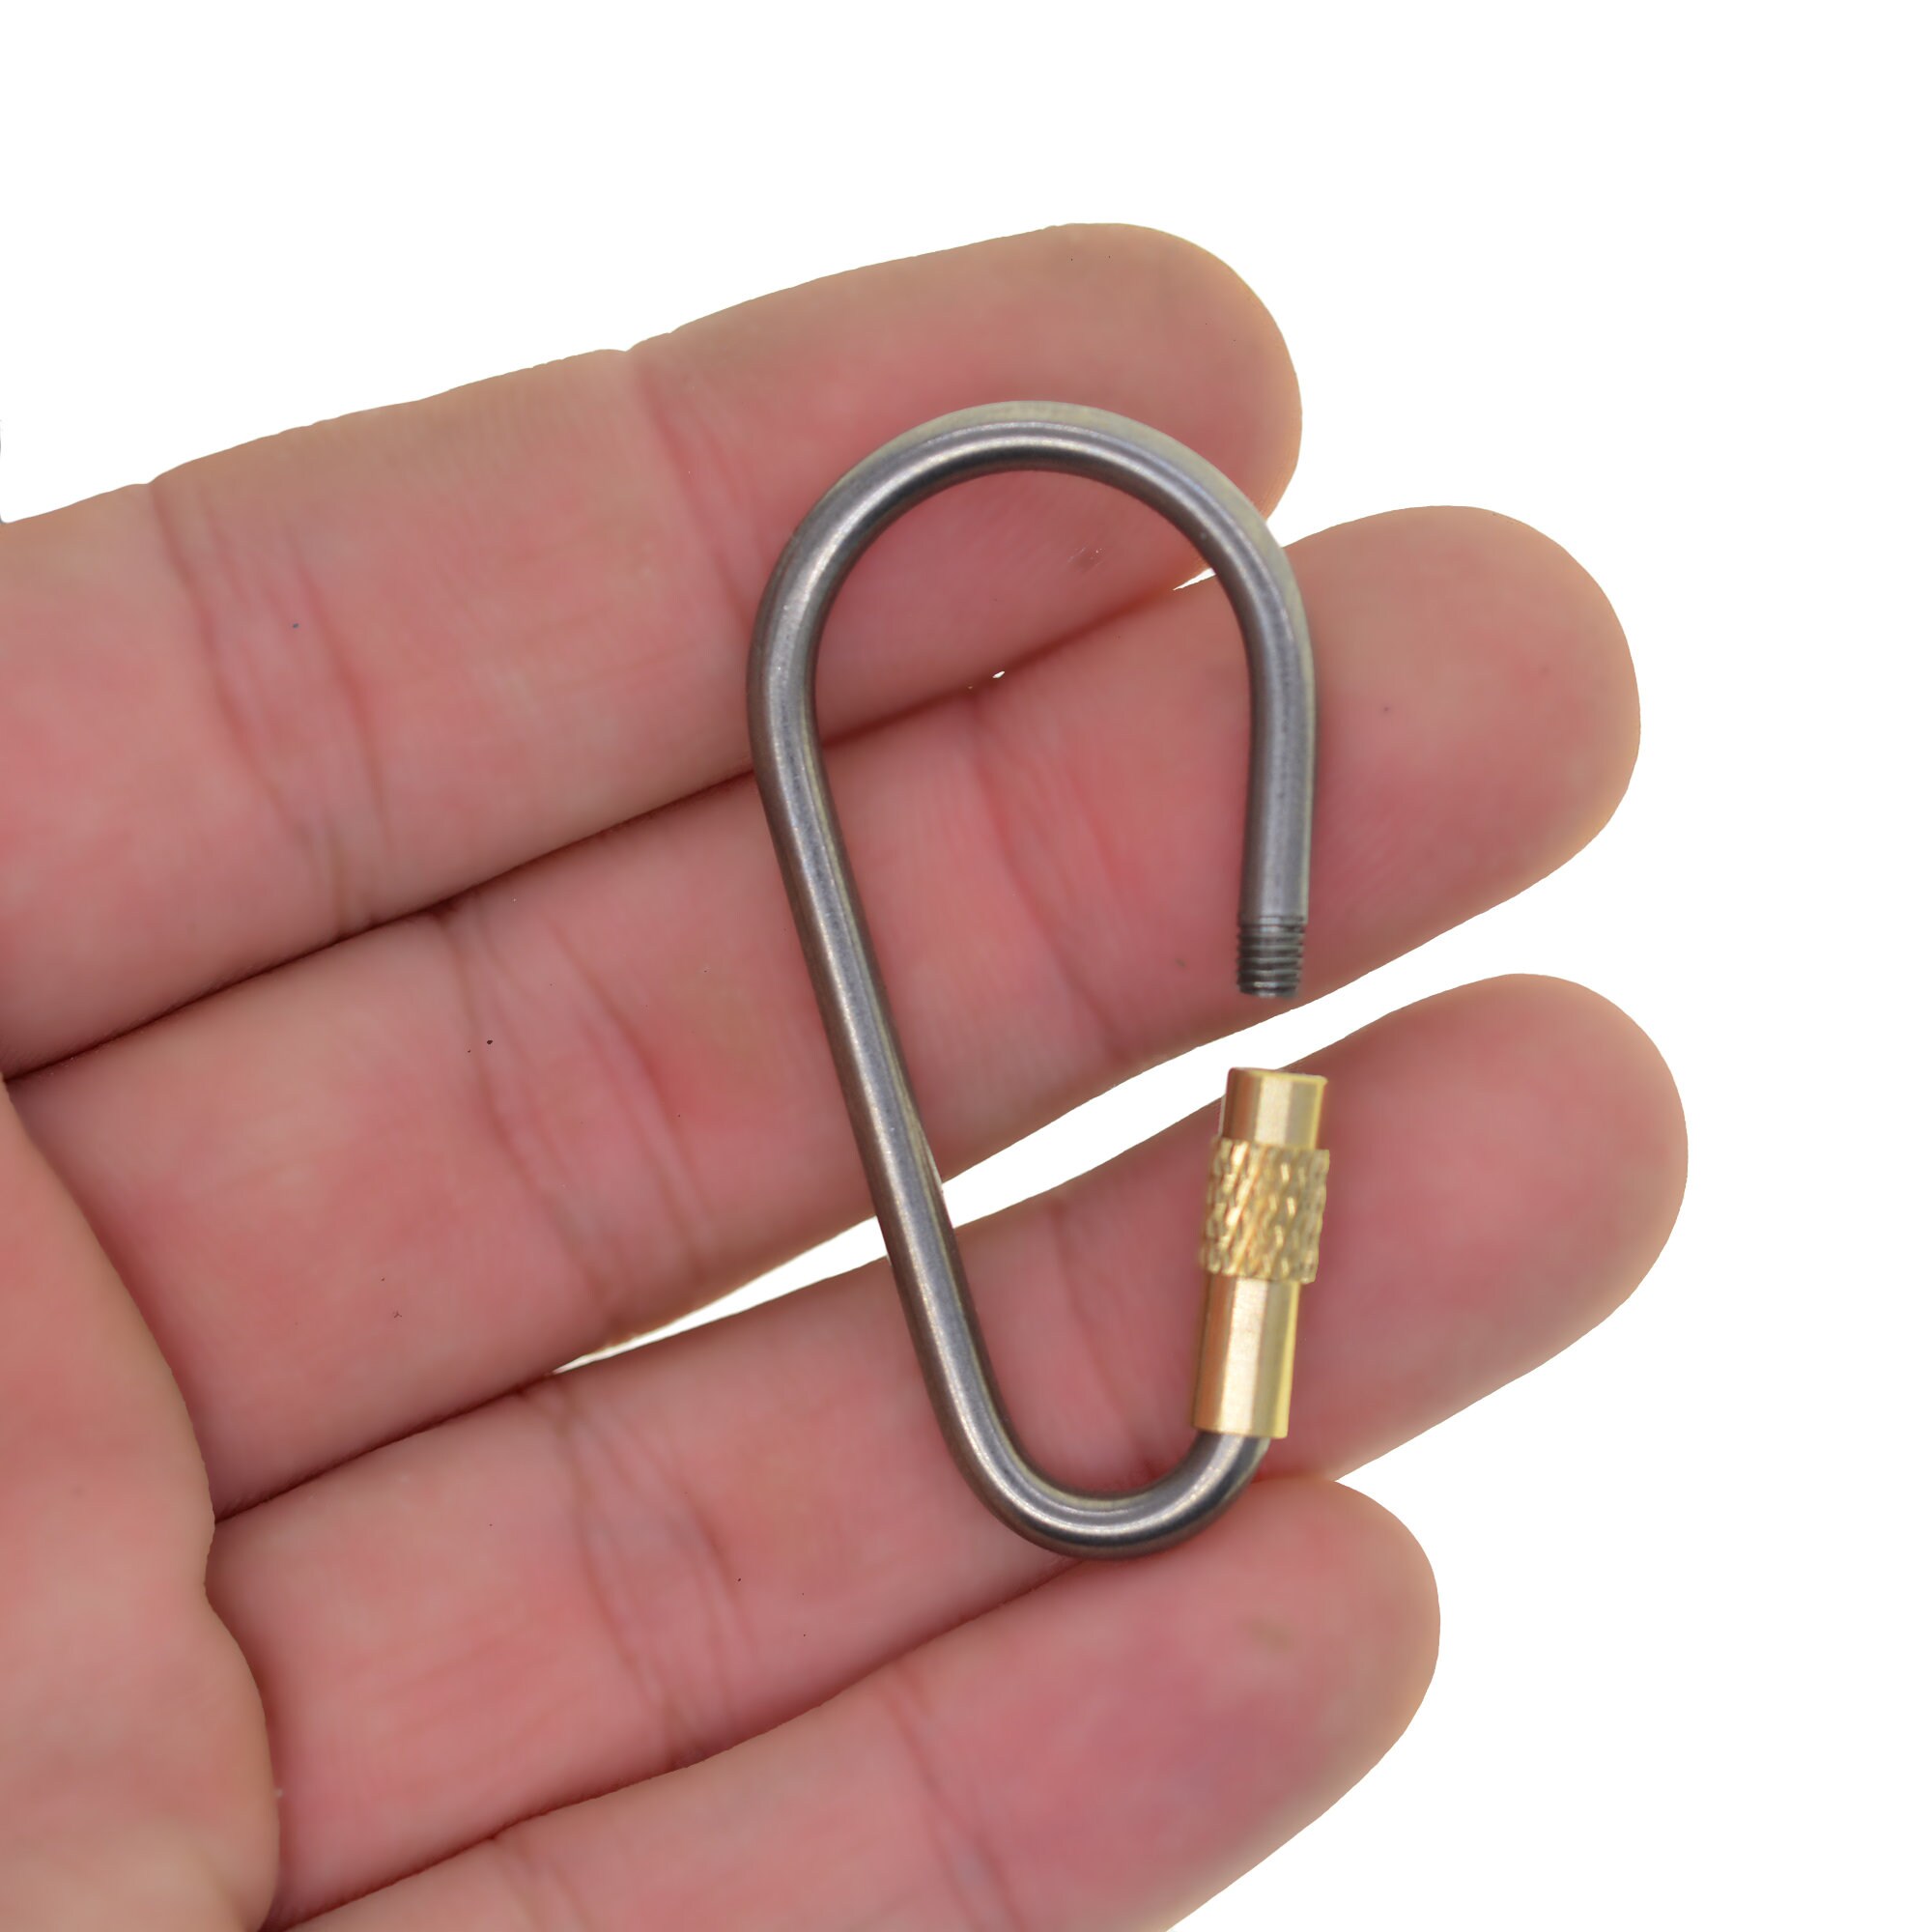 Sterling Silver Carabiner Key Ring 47mm X 23mm Made in the USA 